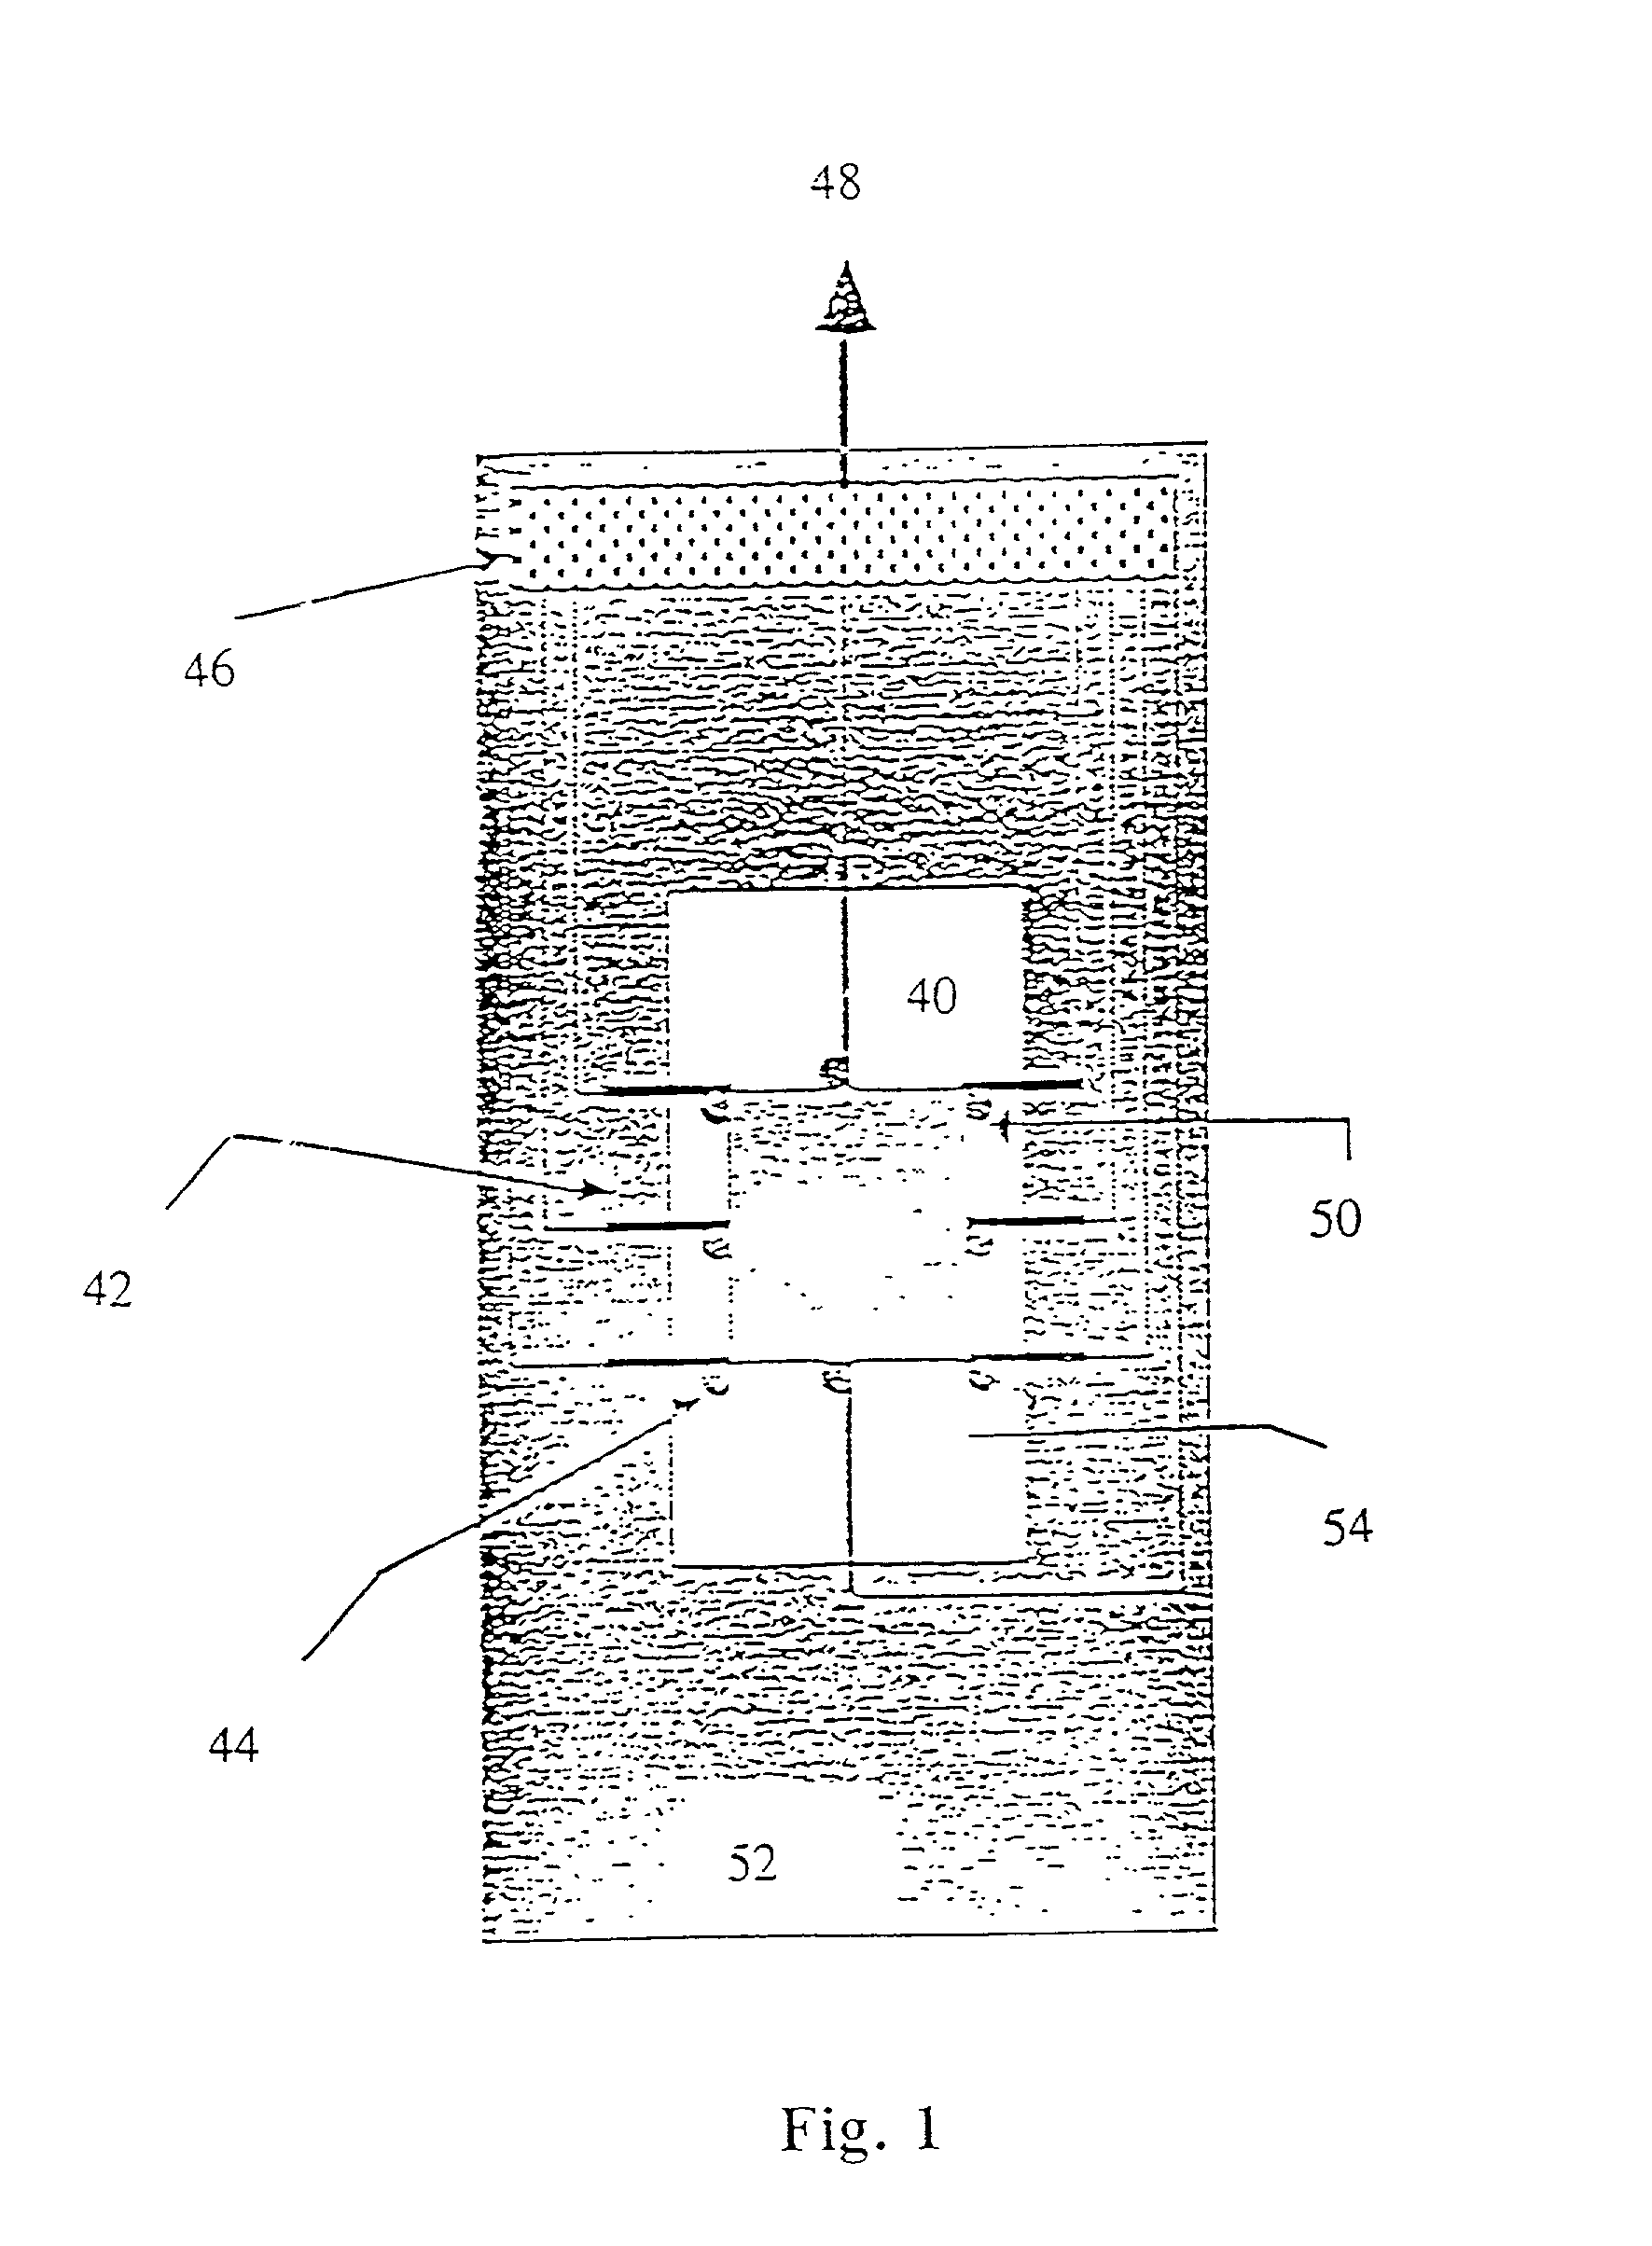 Image processing and analysis of individual nucleic acid molecules